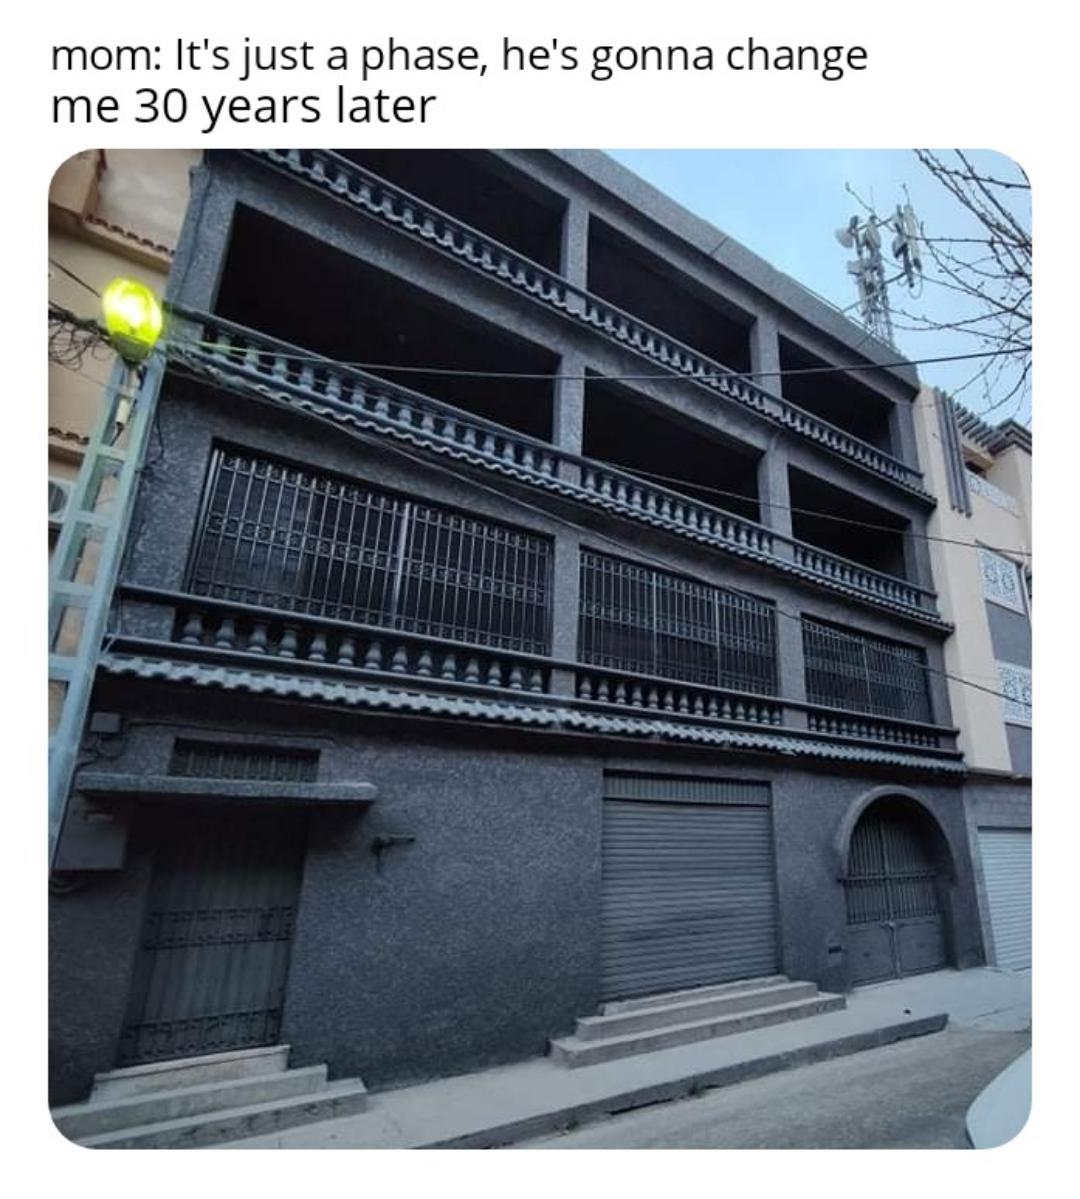 funny memes - dank memes - architecture - mom It's just a phase, he's gonna change me 30 years later